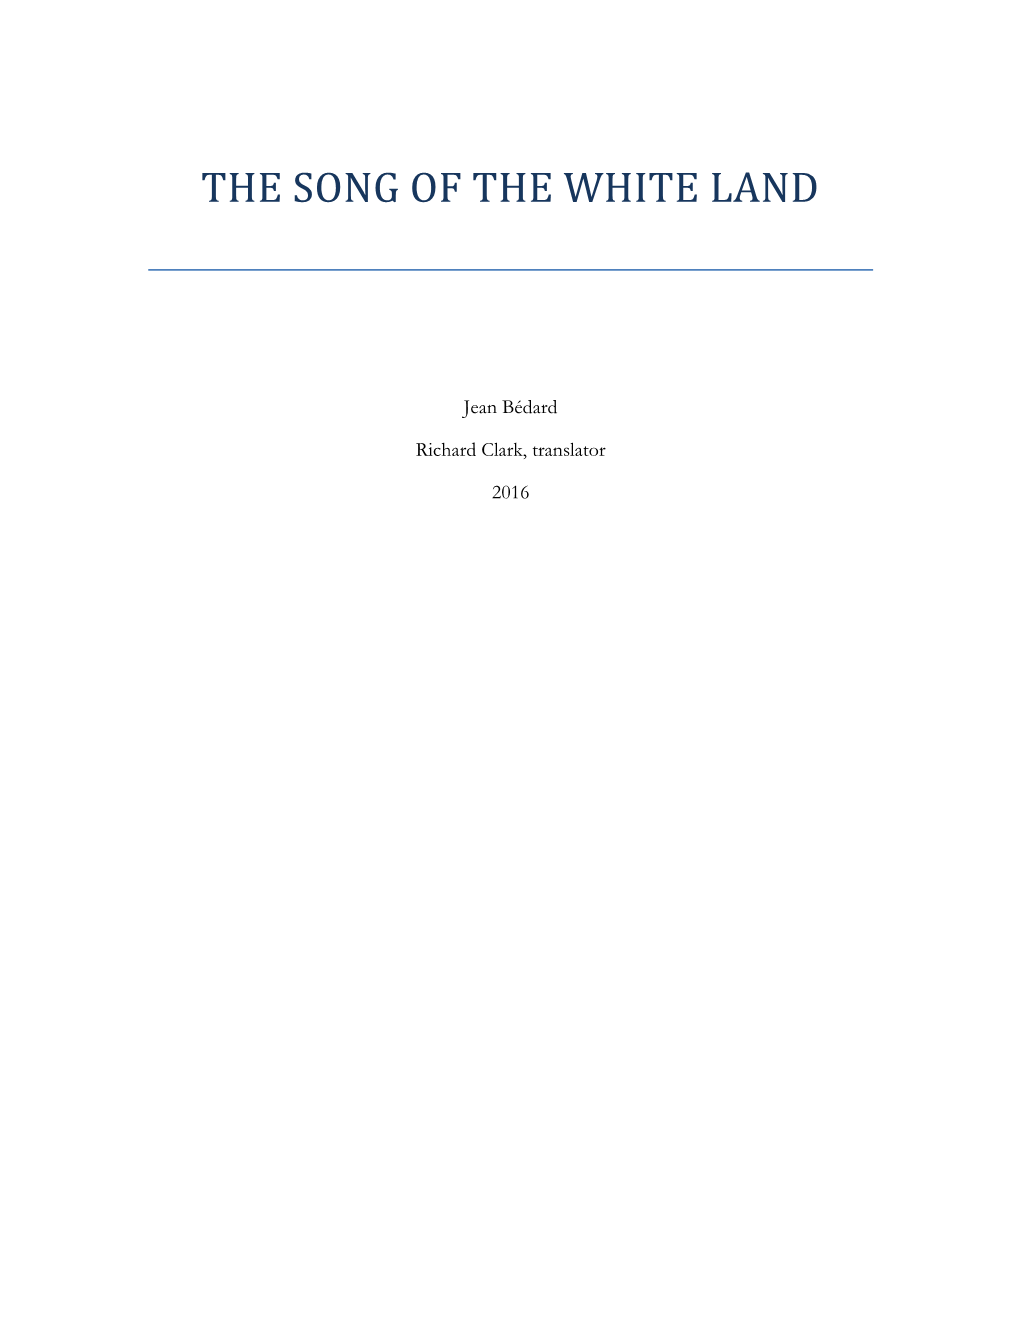 The Song of the White Land